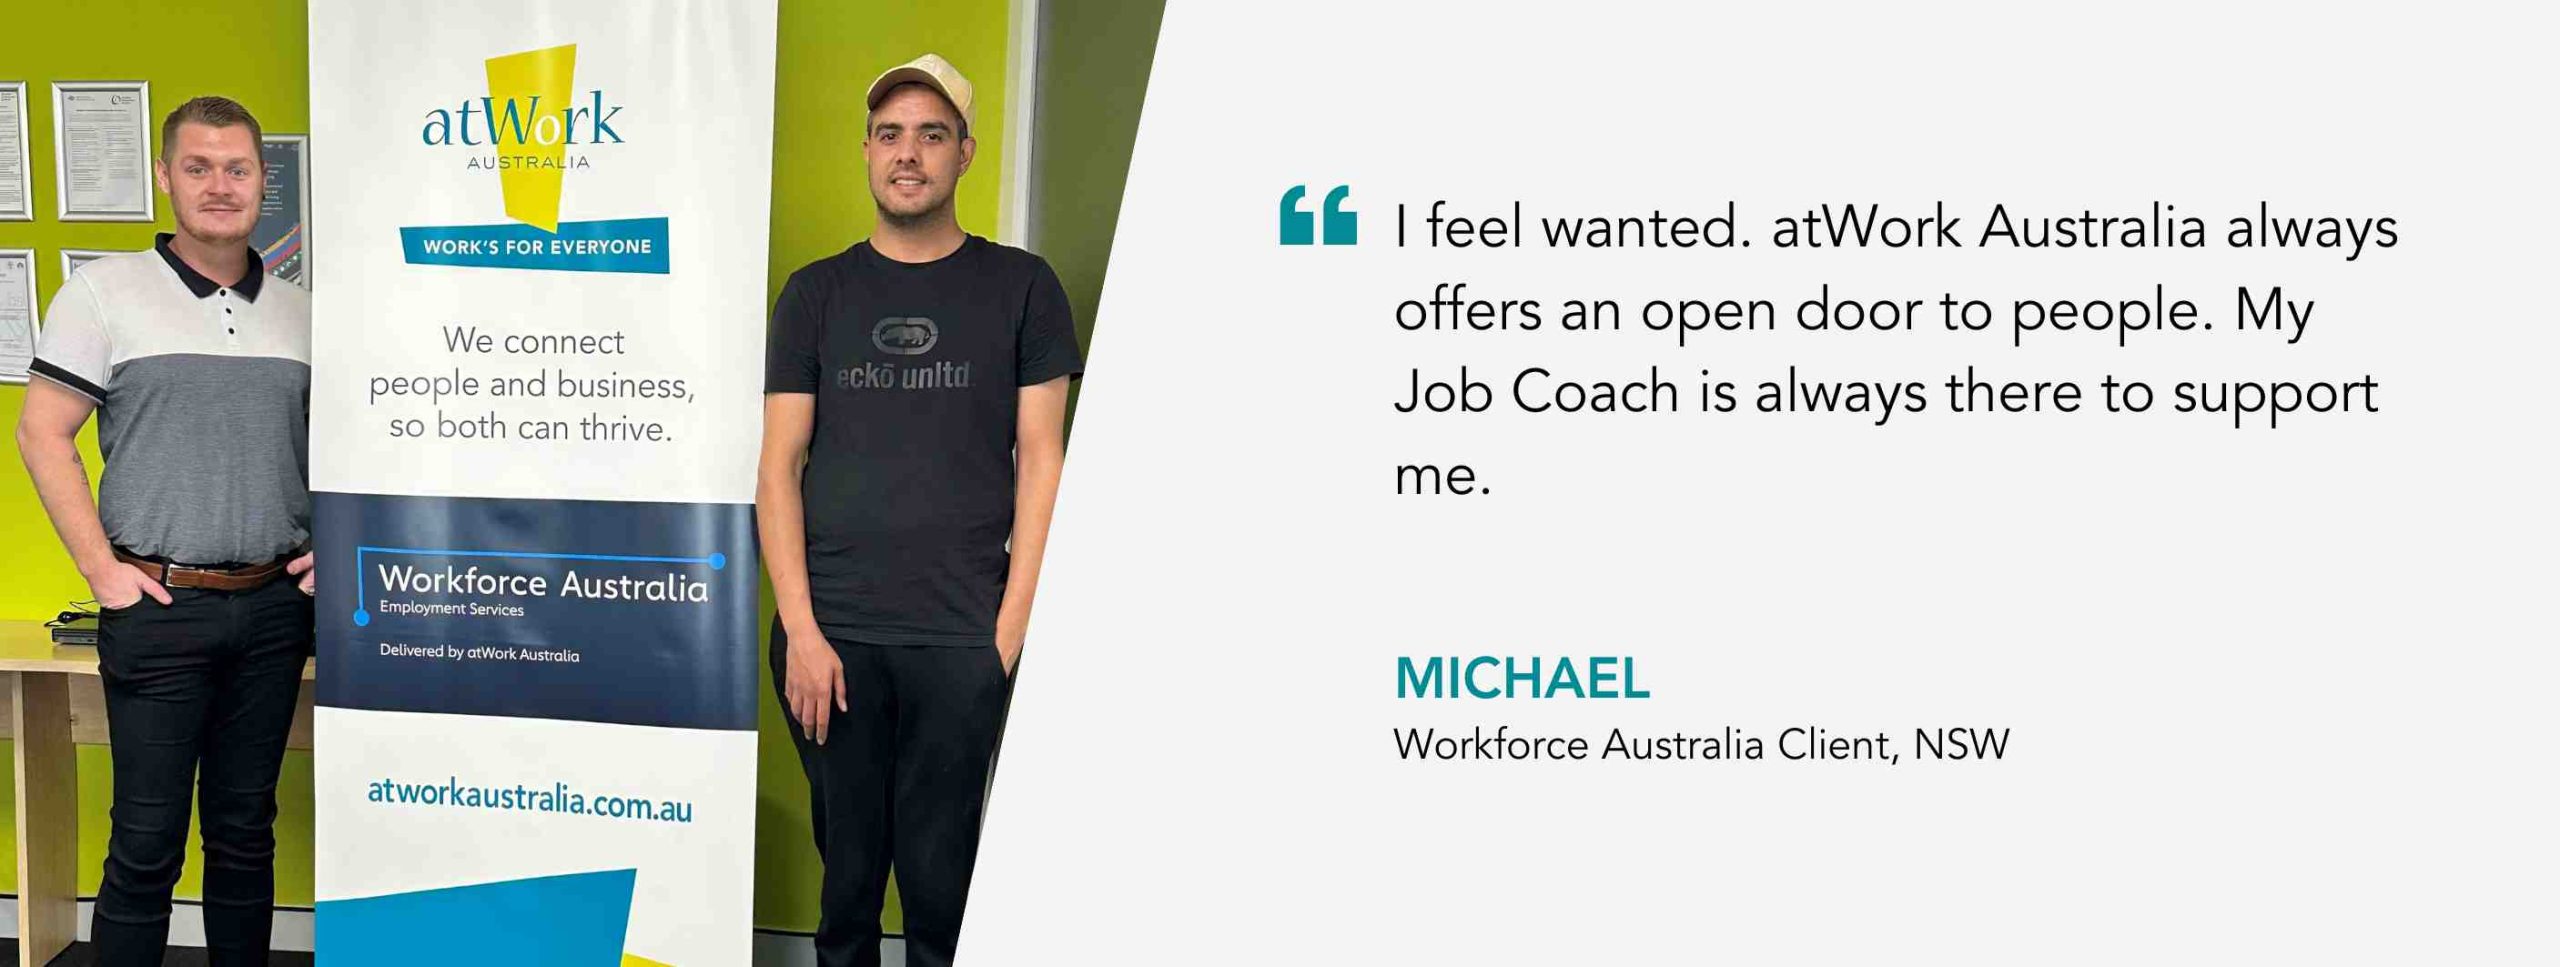 I feel wanted. atWork Australia always offers an open door to people. My Job Coach is always there to support me. Michael, Workforce Australia Client, NSW